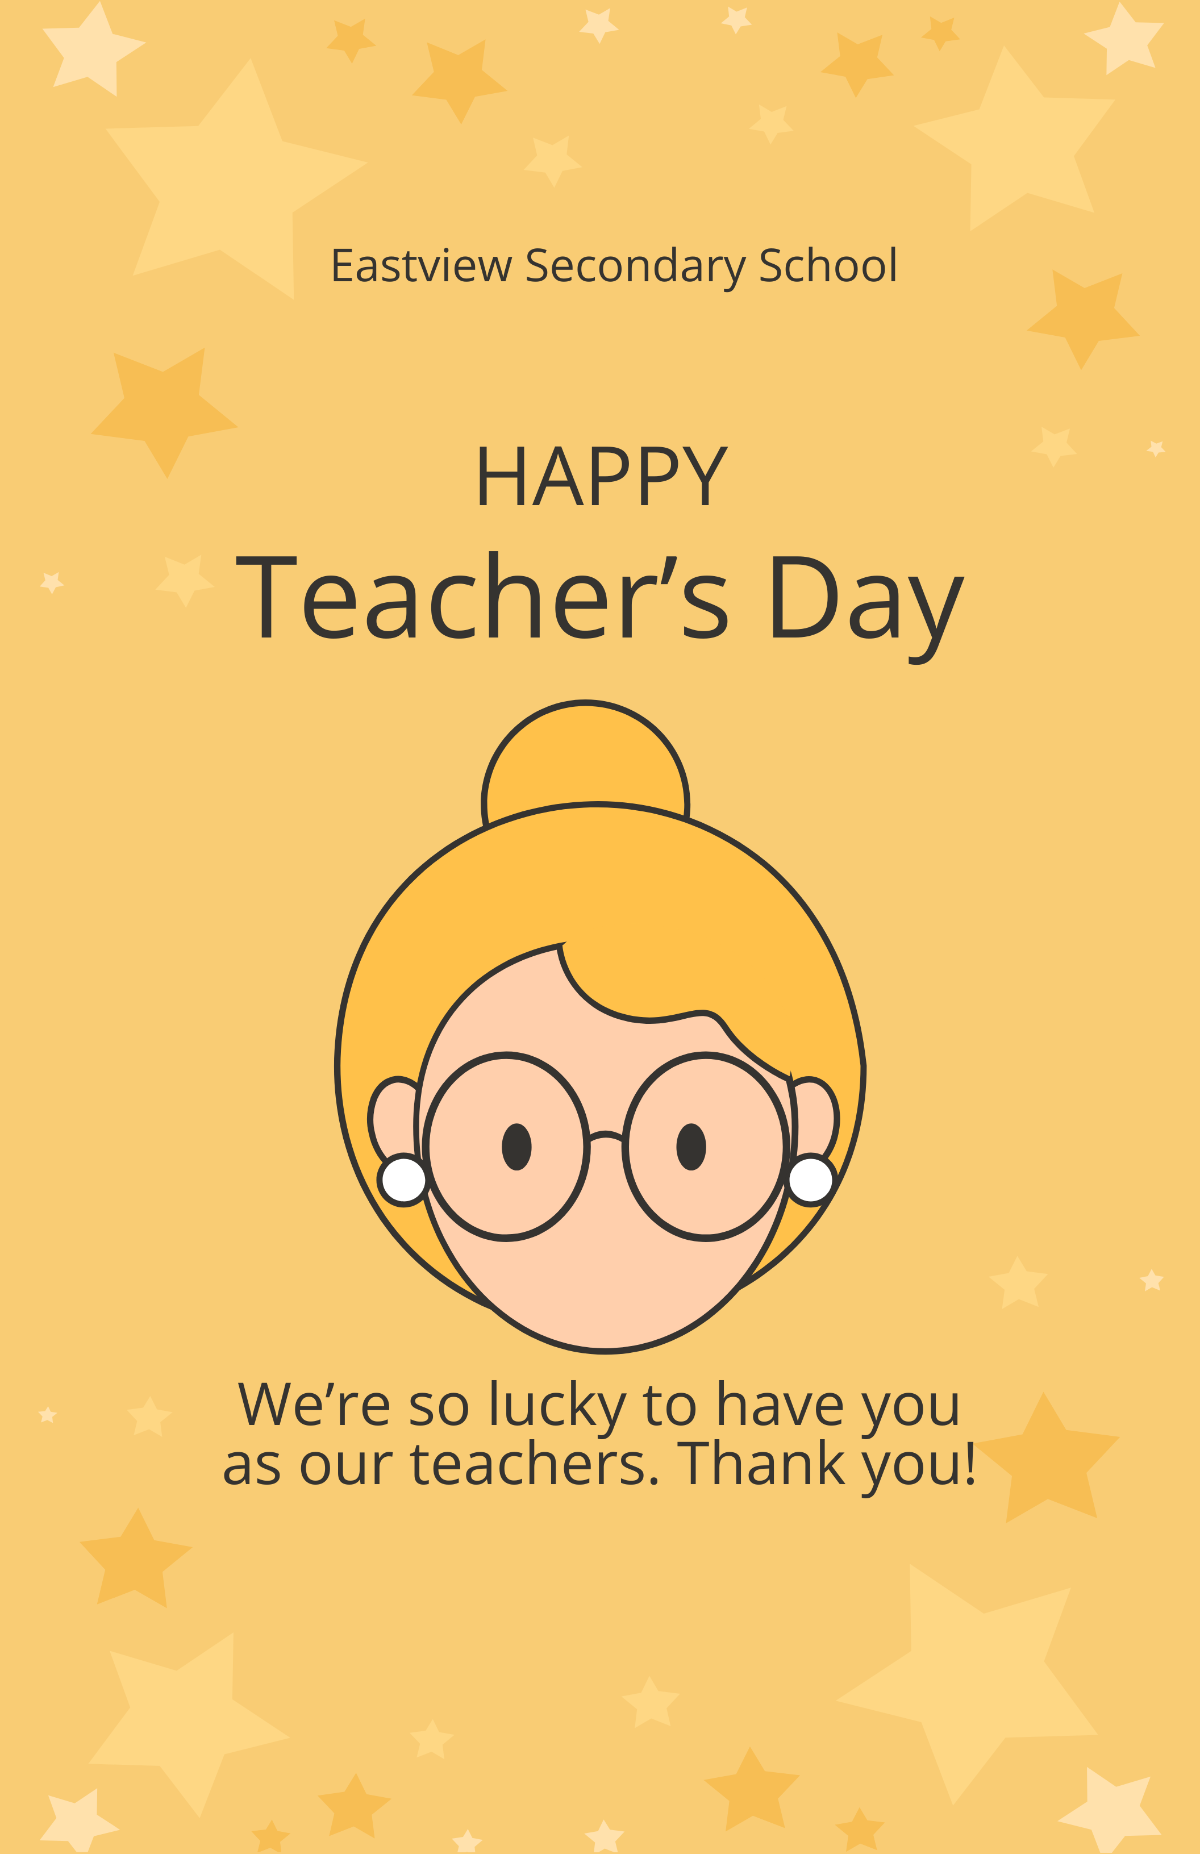 Teacher's Day Wishes Poster Template